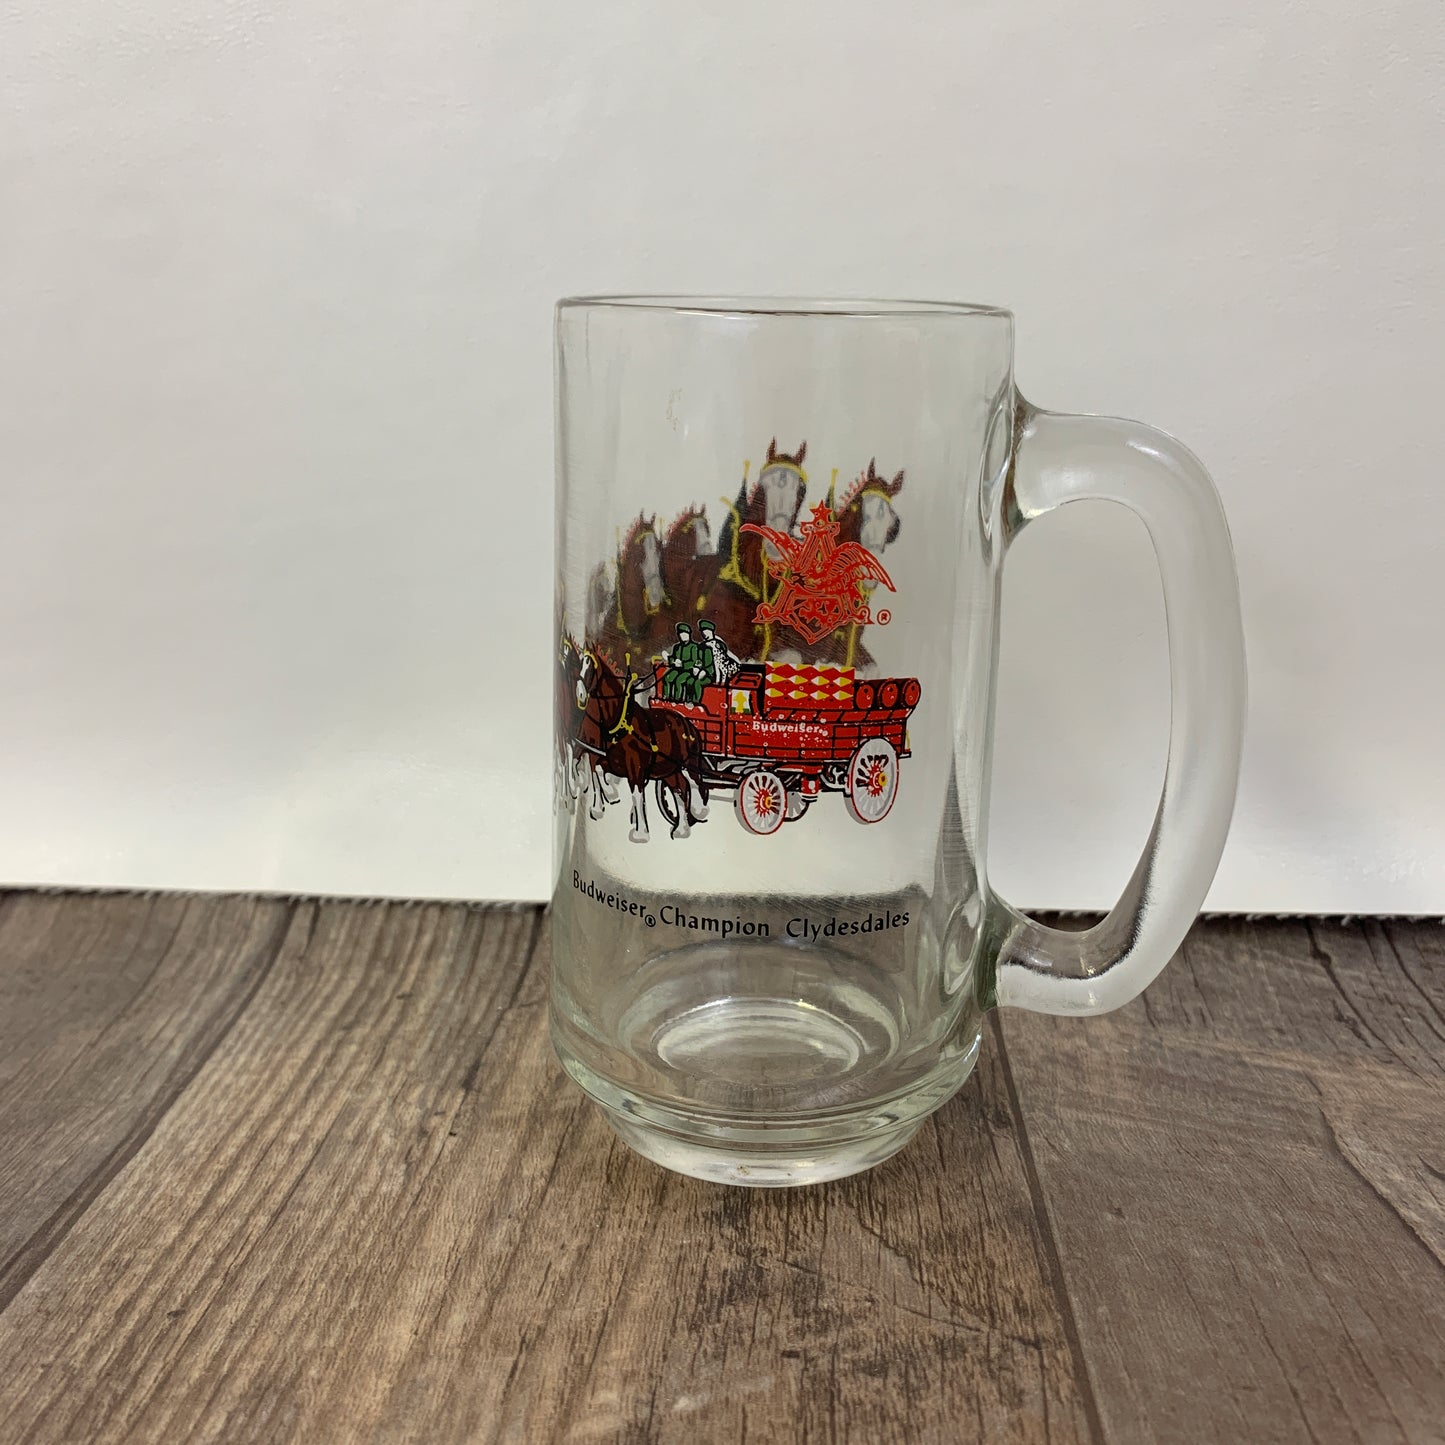 Budweiser Clydesdale Glass Stein, Vintage Barware, Gifts for Dad